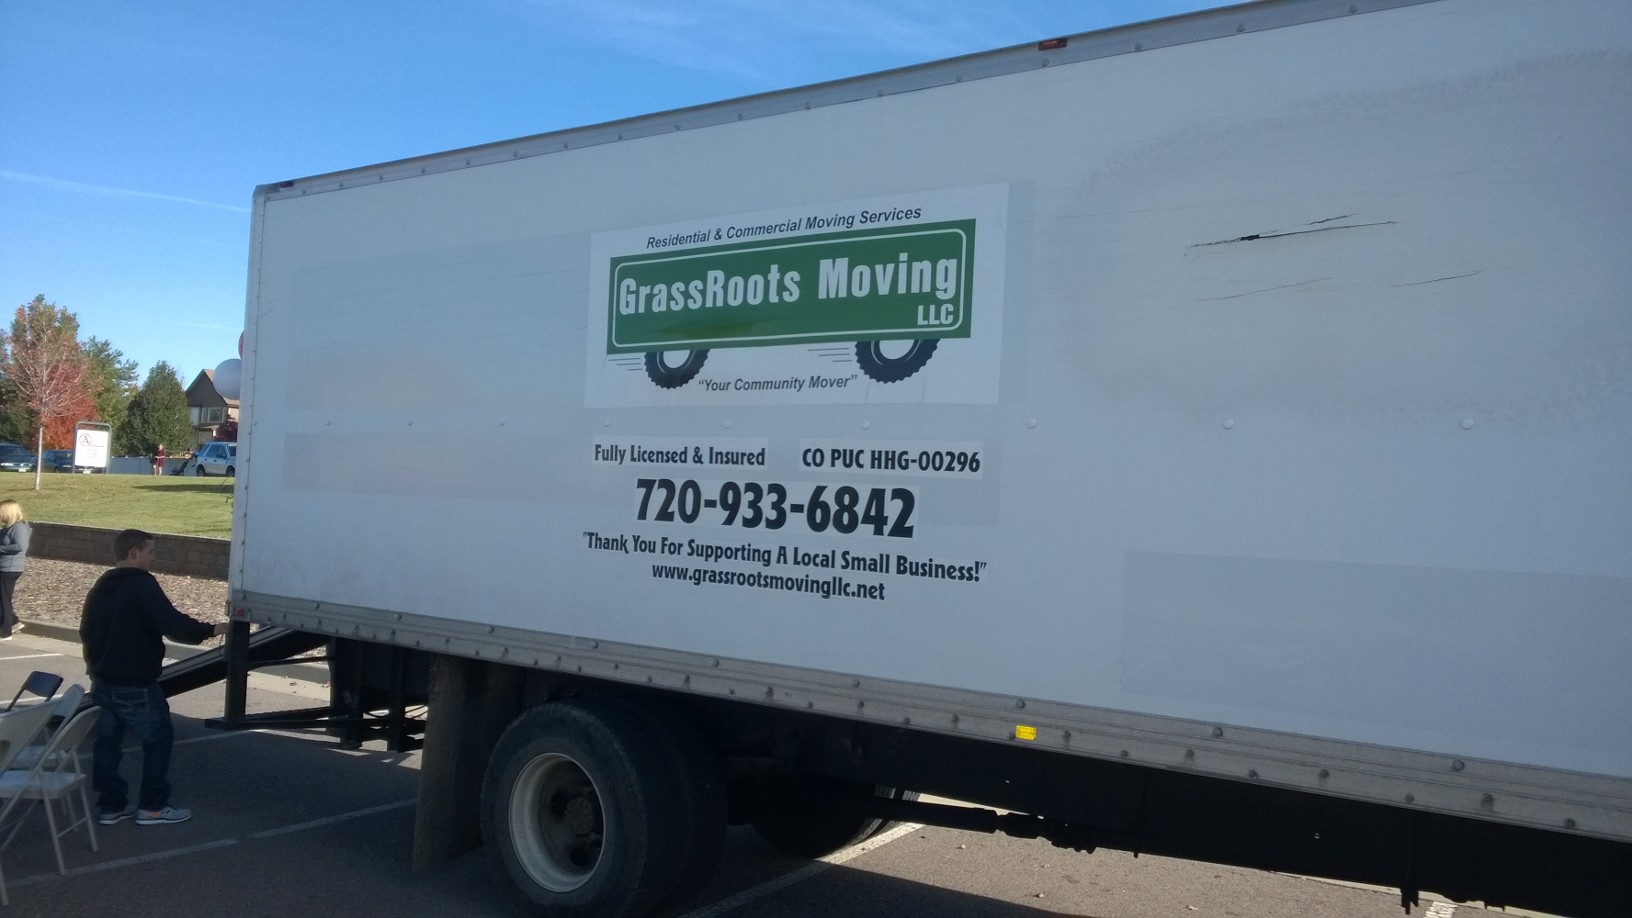 GrassRoots moving truck